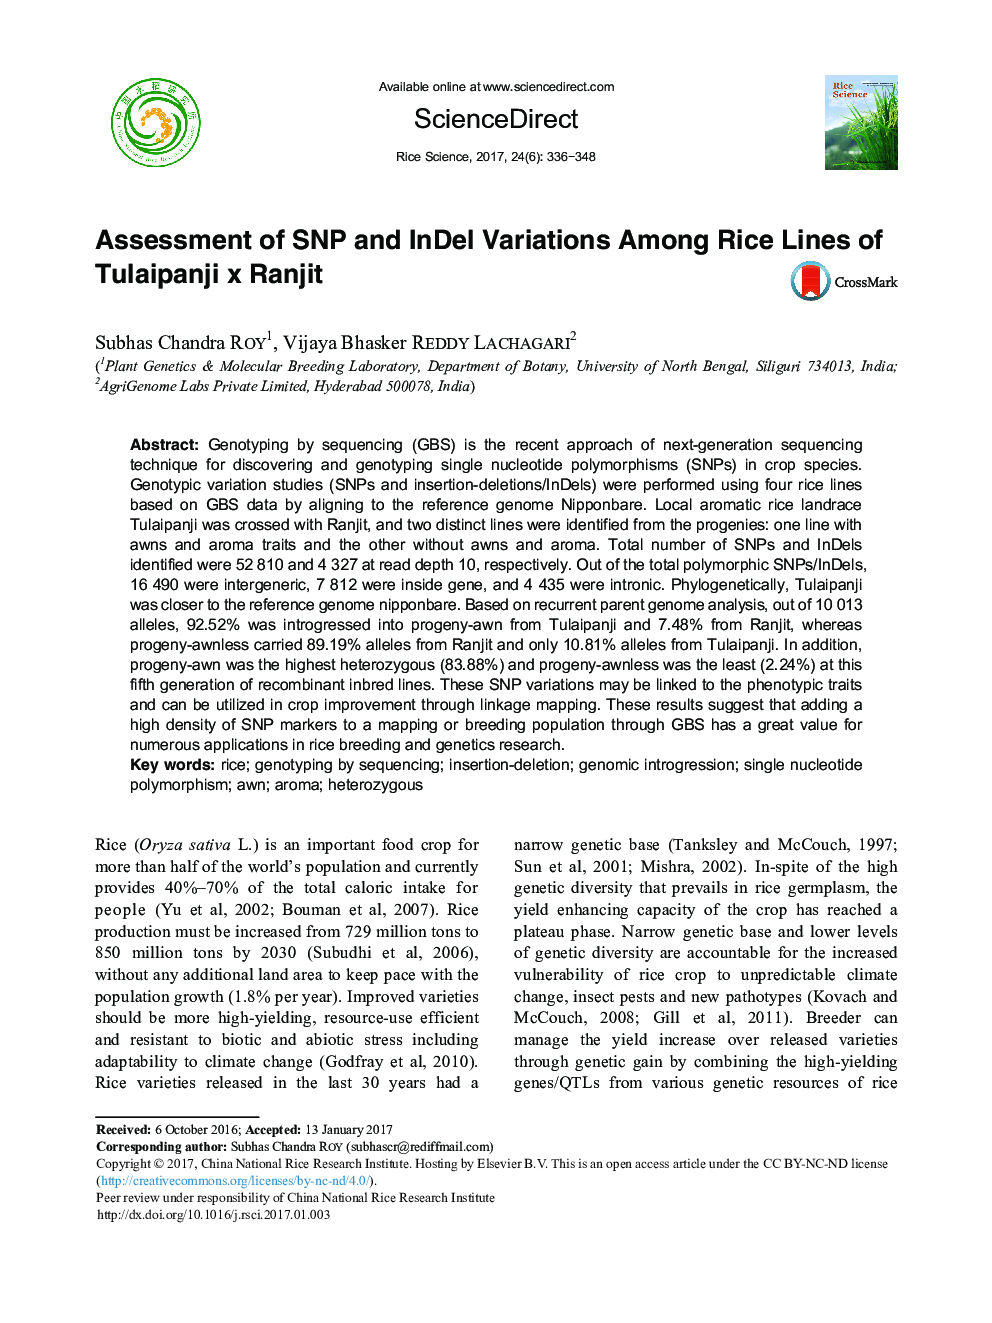 Assessment of SNP and InDel Variations Among Rice Lines of Tulaipanji x Ranjit